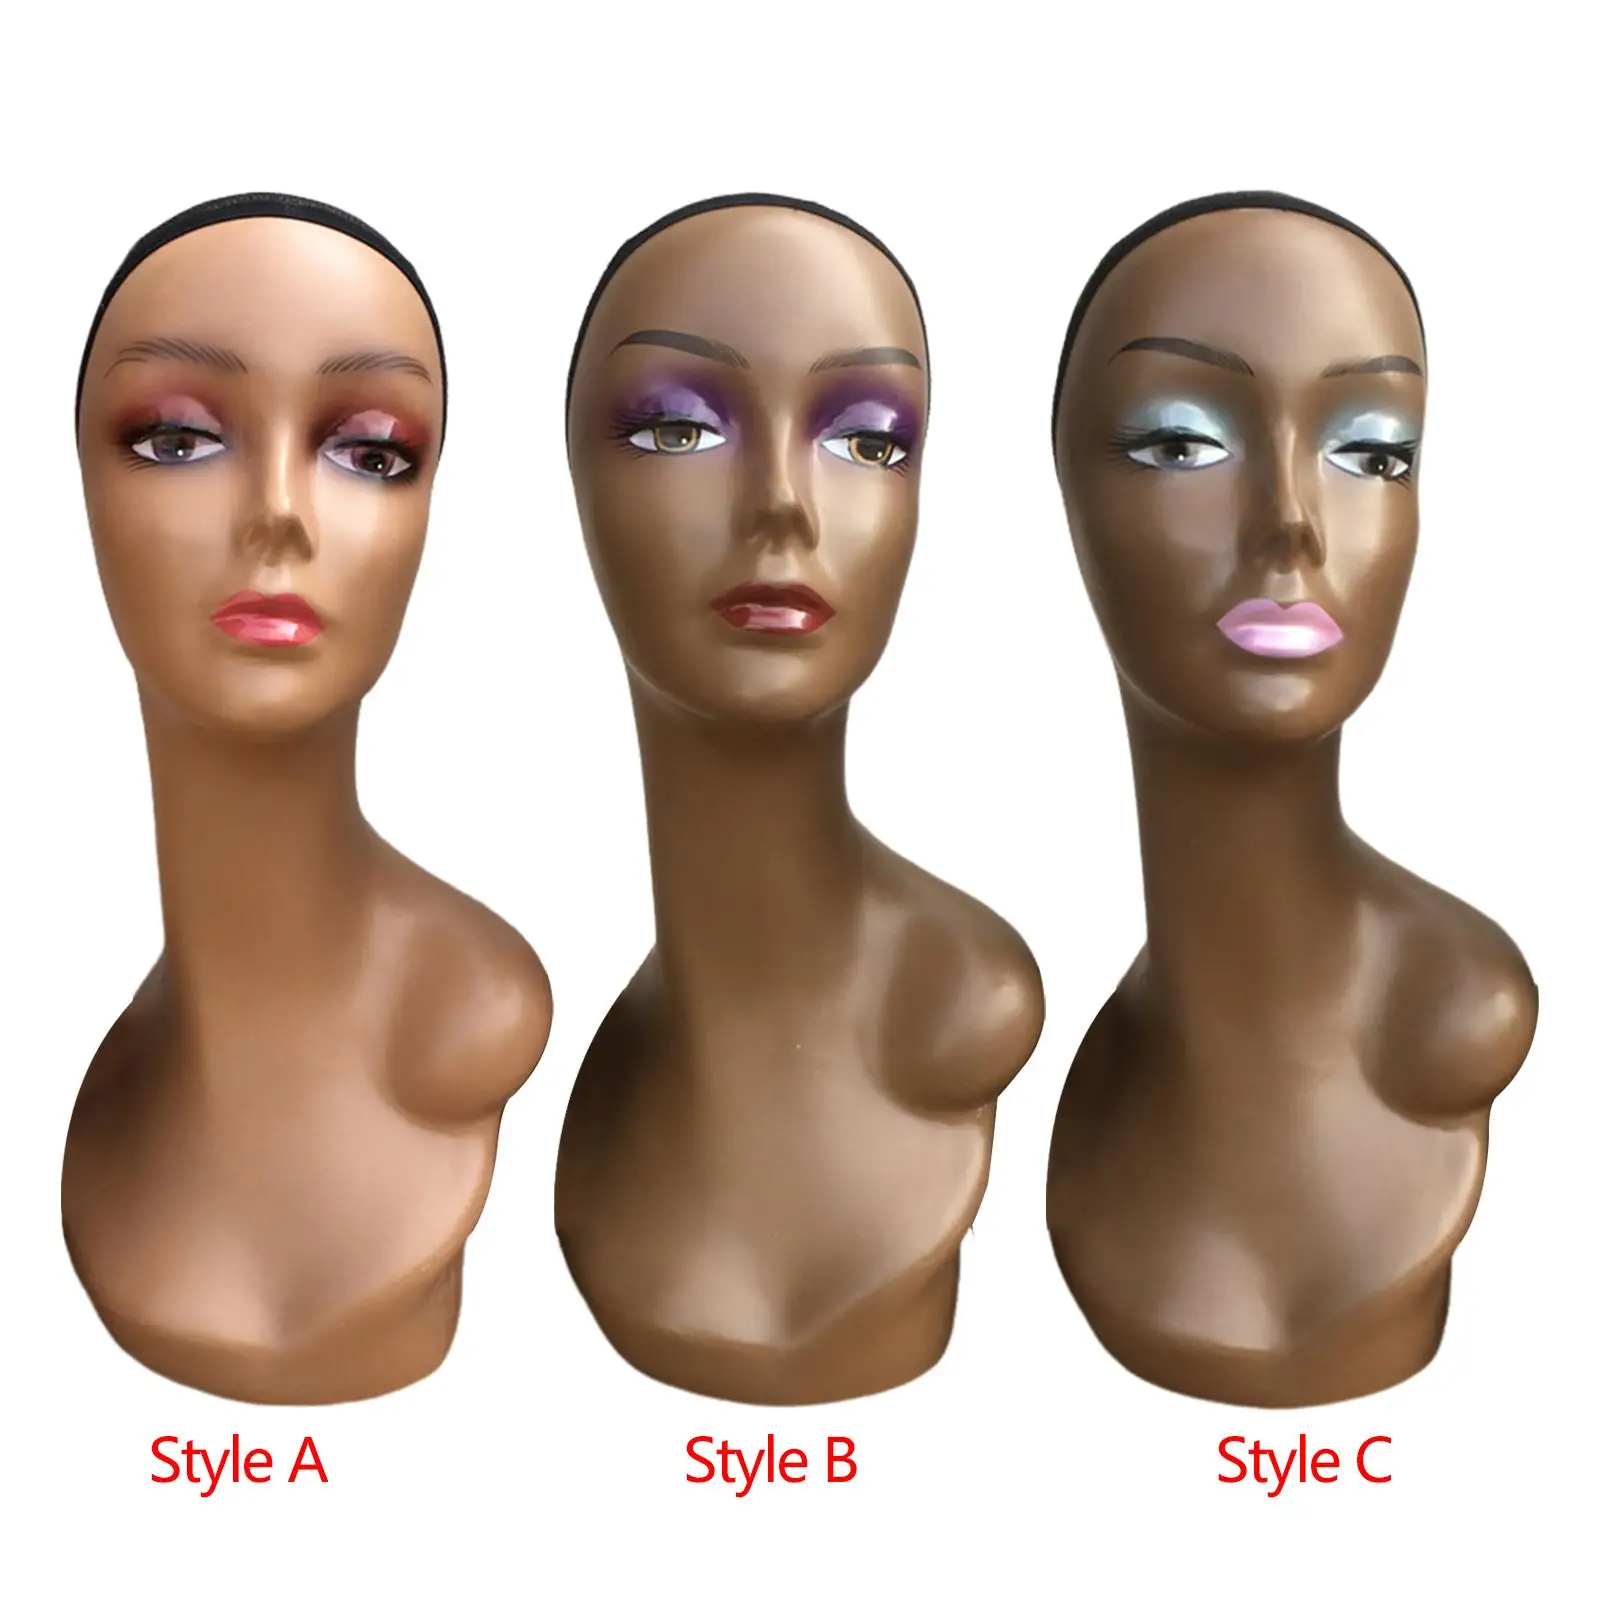 Woman Mannequin Head Model Sturdy Smooth Surface Multipurpose Practical Hat Display Stand Height 48cm Lifelike for Styling